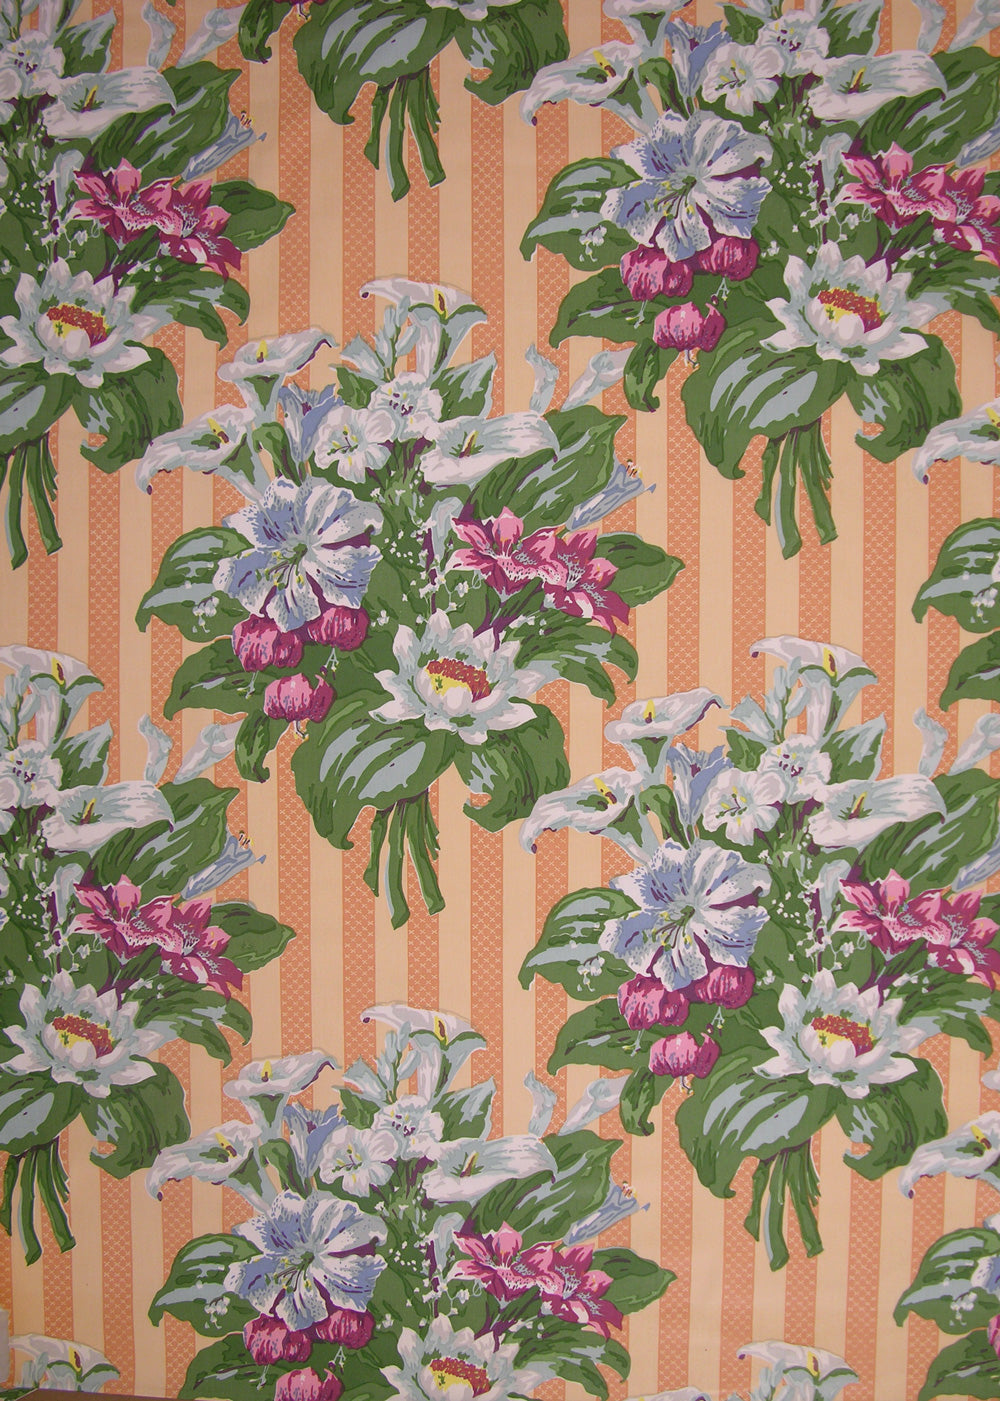 fabric printed with easter lilies on an orange striped background